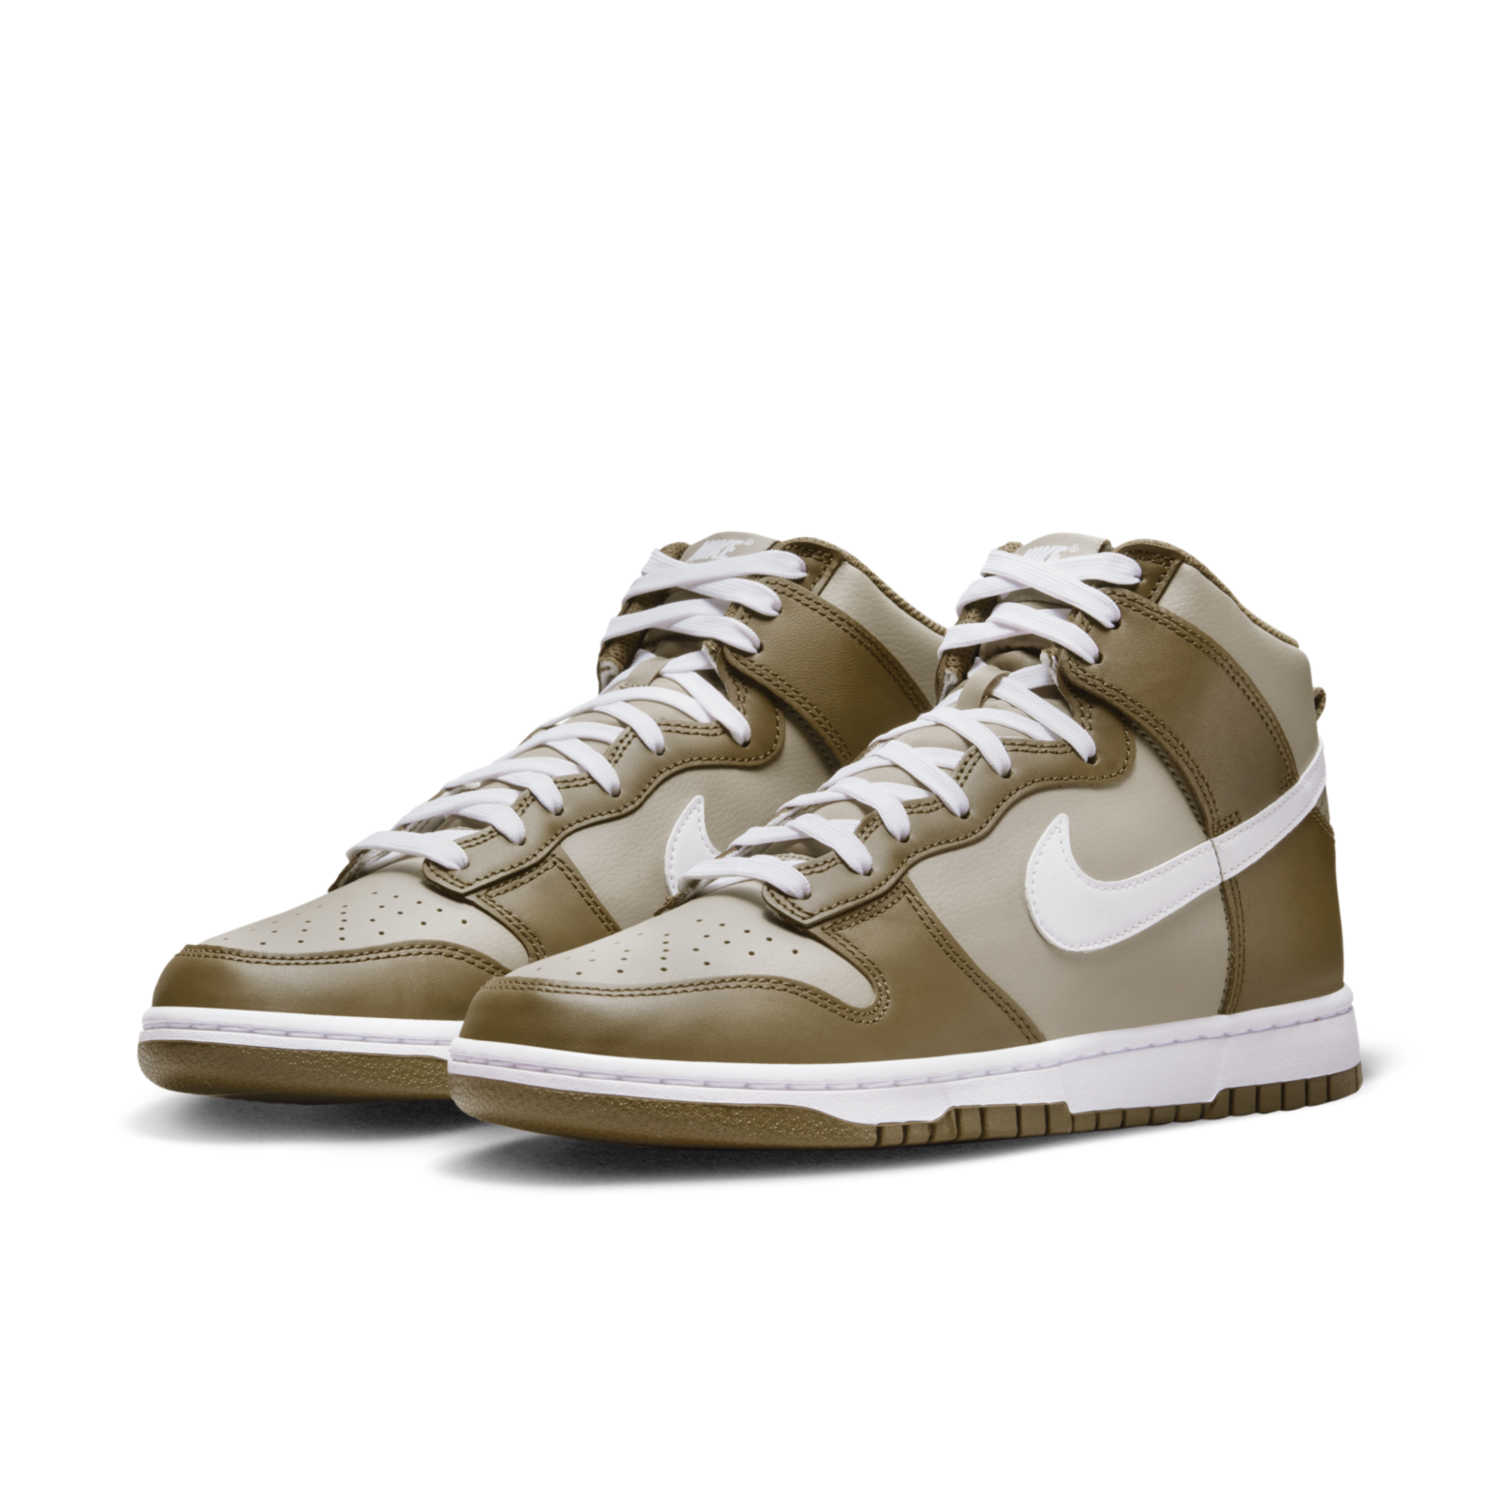 Nike Dunk High Retro 'Mocha' Most Wanted Sneaker Releases Woche 34